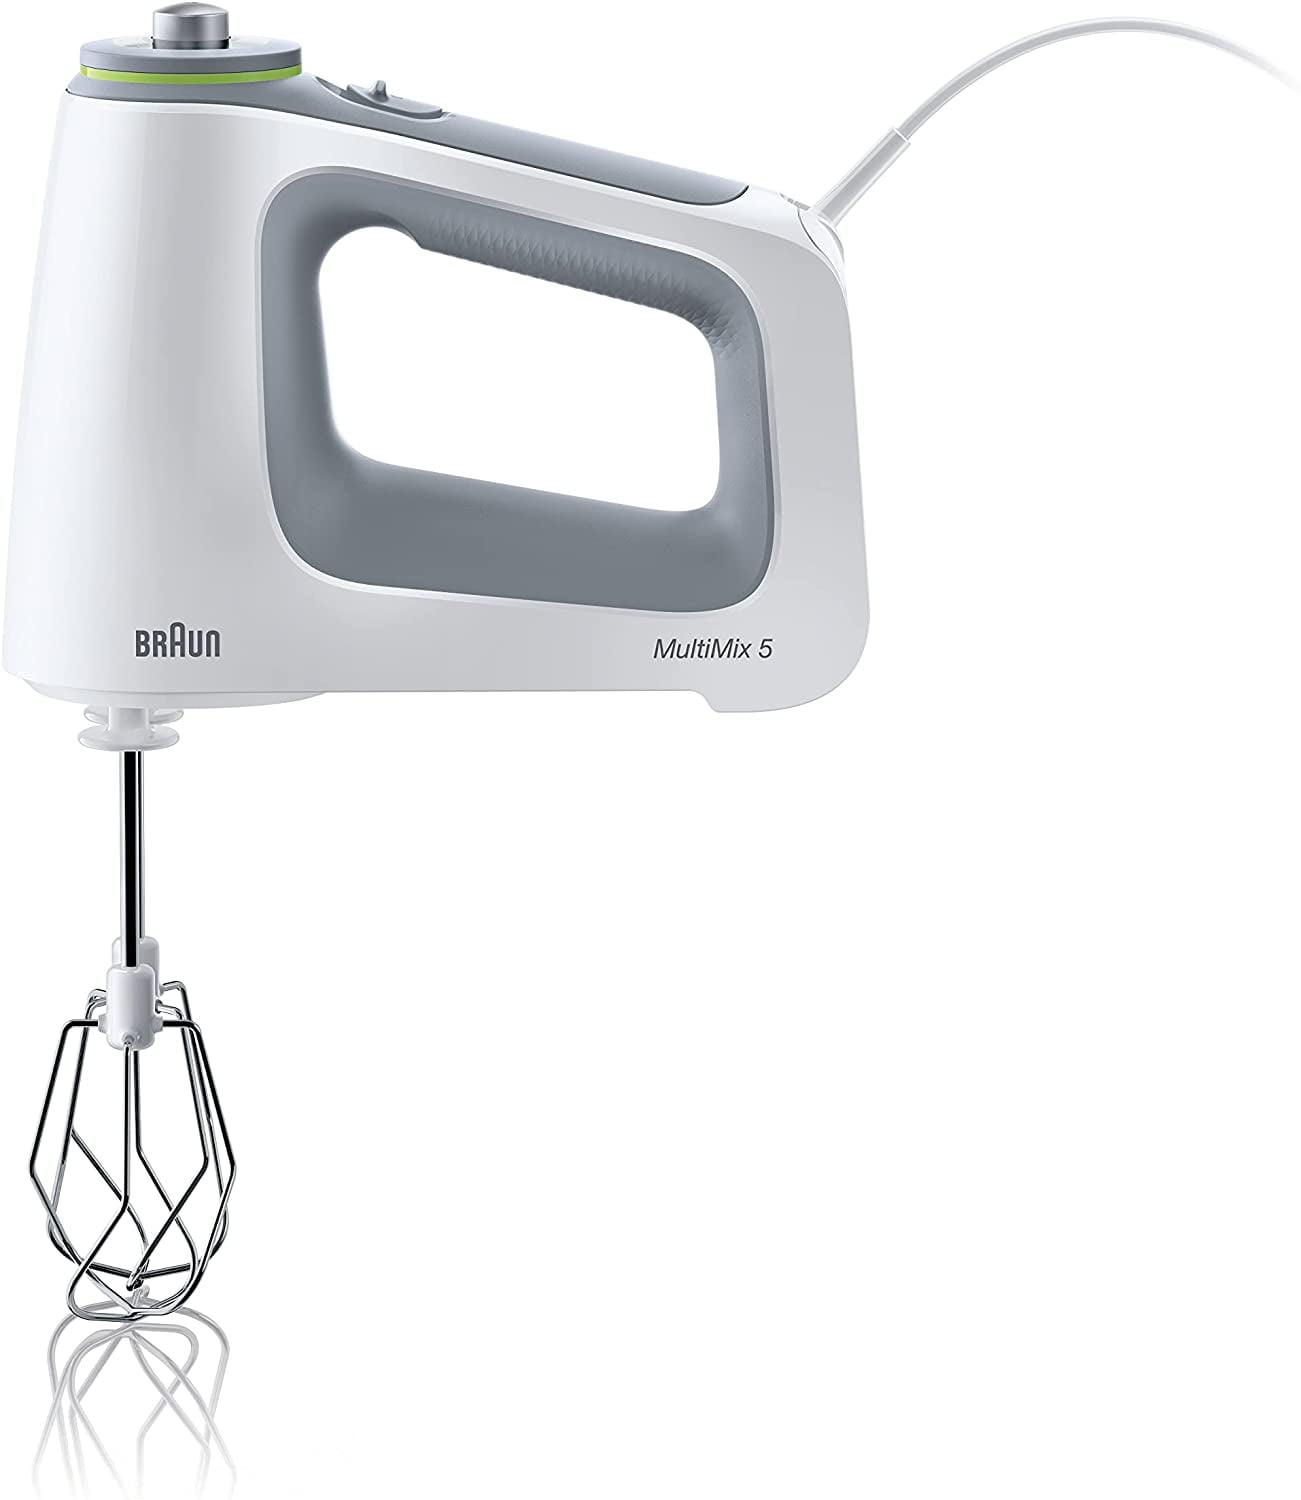 MultiMix 5 Hand Mixer in White with MultiWhisks and Hooks, 350-Watts Walmart.com